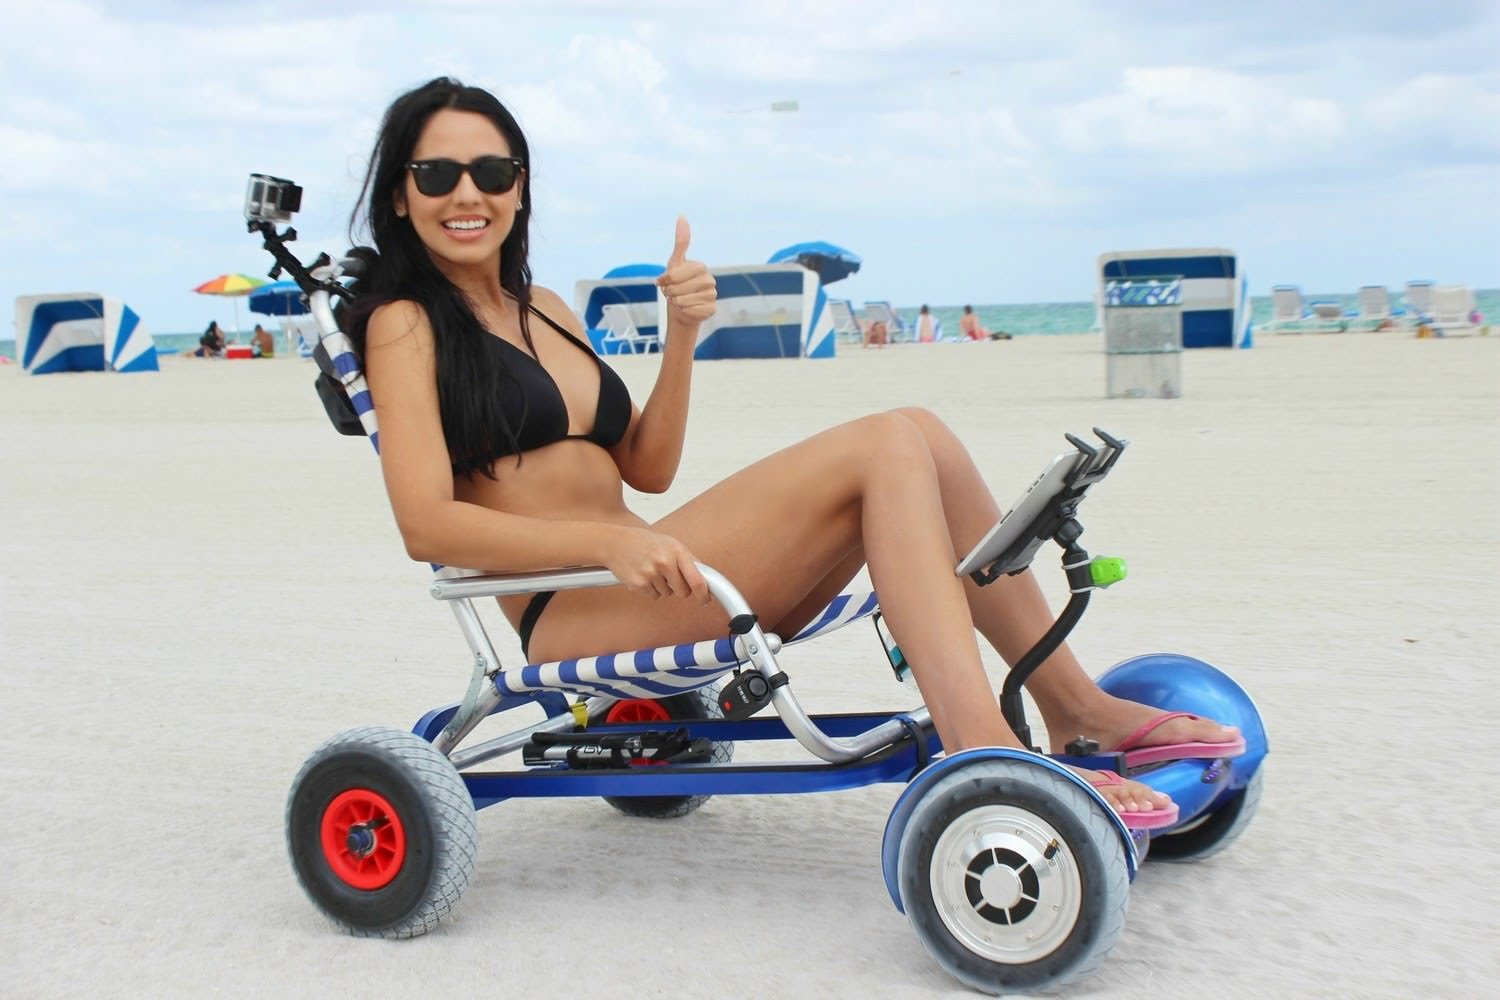 Hoverboard Cart Turns Hoverboard Into A Mobile Beach Throne SHOUTS